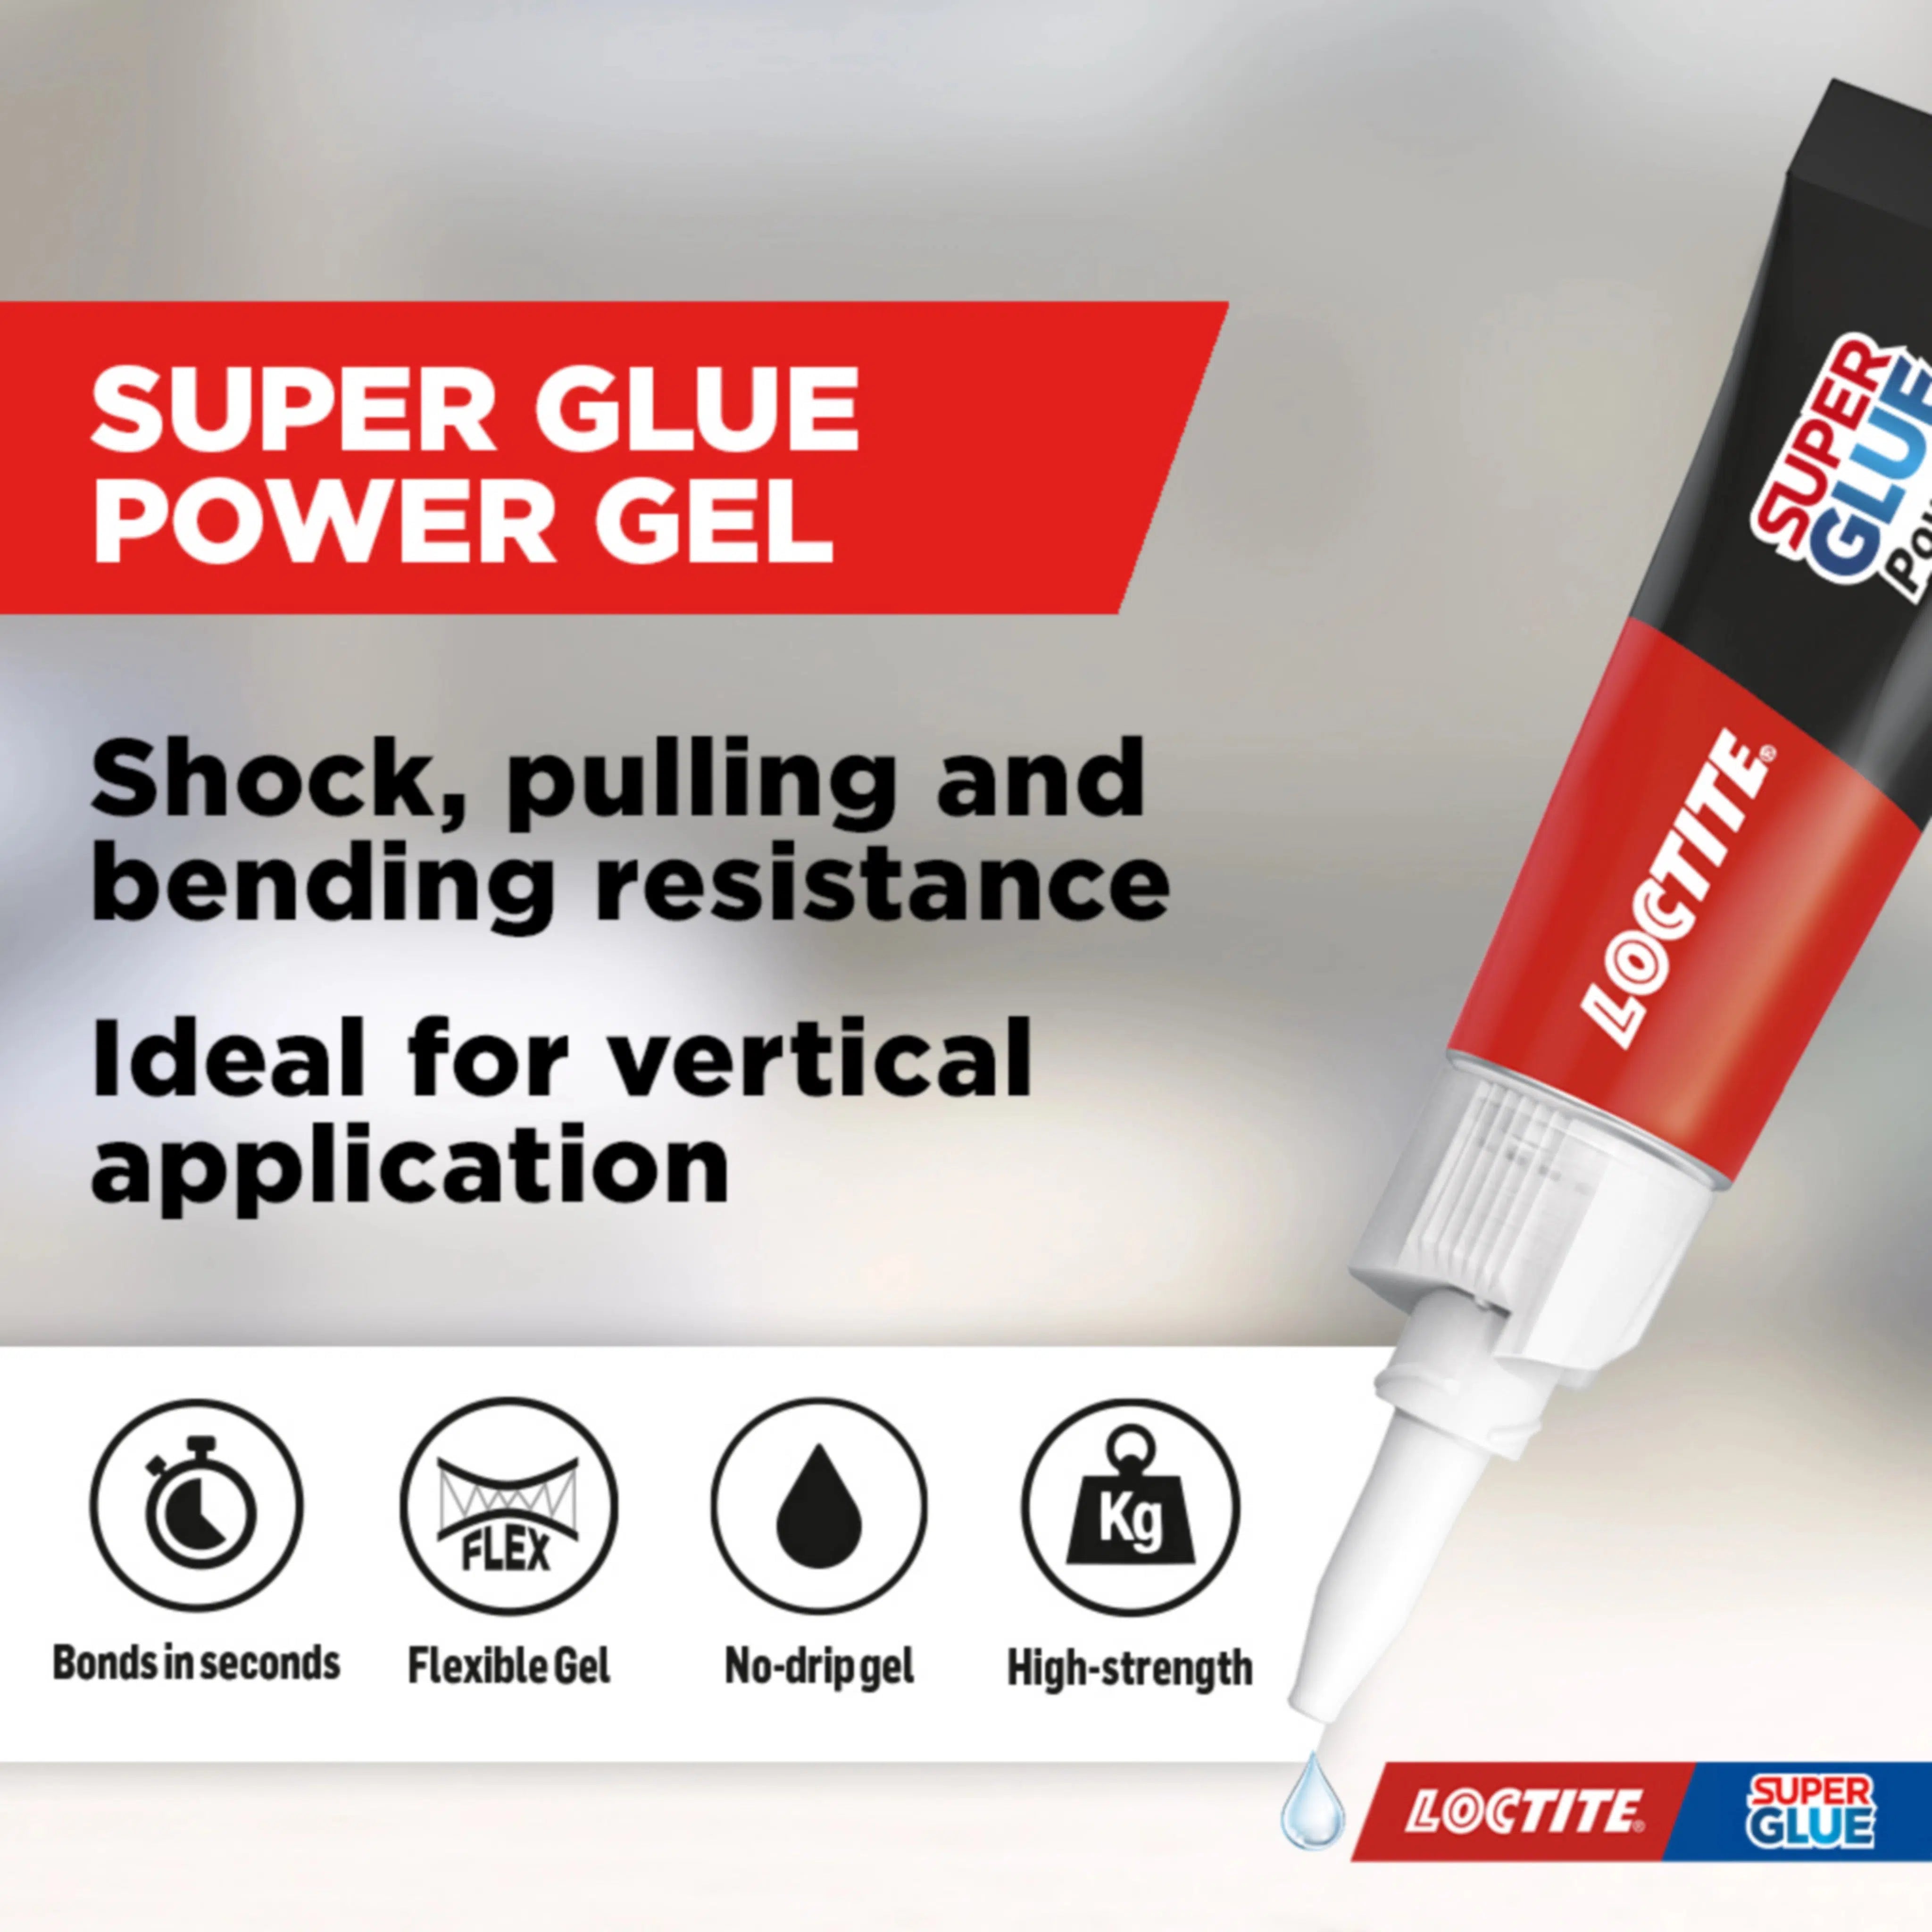 Loctite Power Gel Super Glue 3g Miniature for Dungeons and Dragons, Pathfinder or other TTRPGs